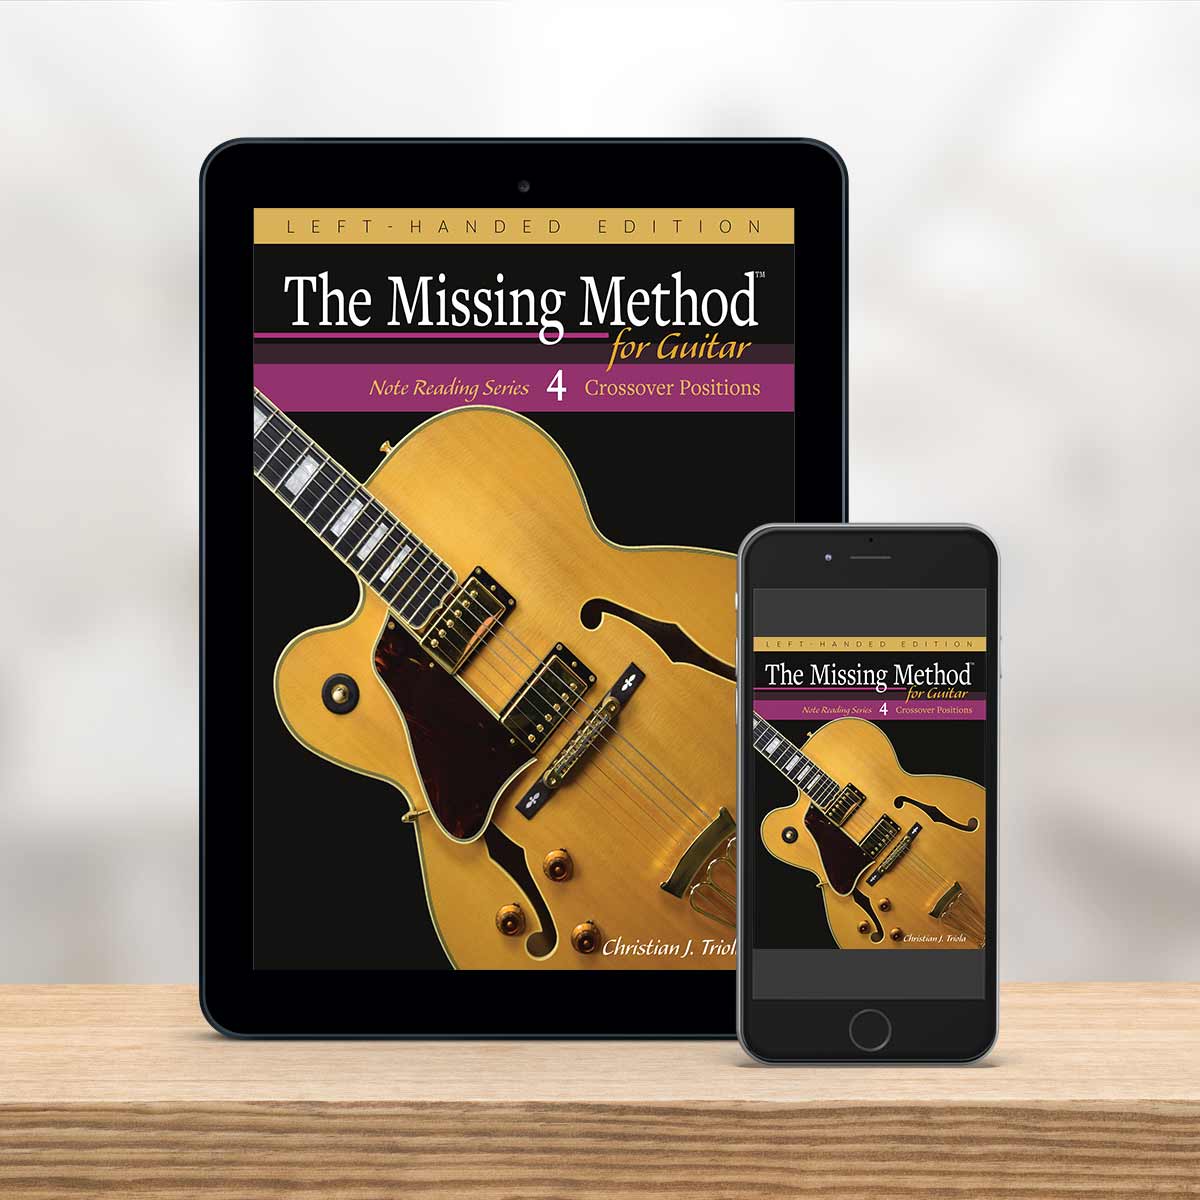 Digital Tablet and smartphone showing the cover of The Missing Method for Guitar Note Reading Series Book 4, Left-Handed Edition by Christian Triola